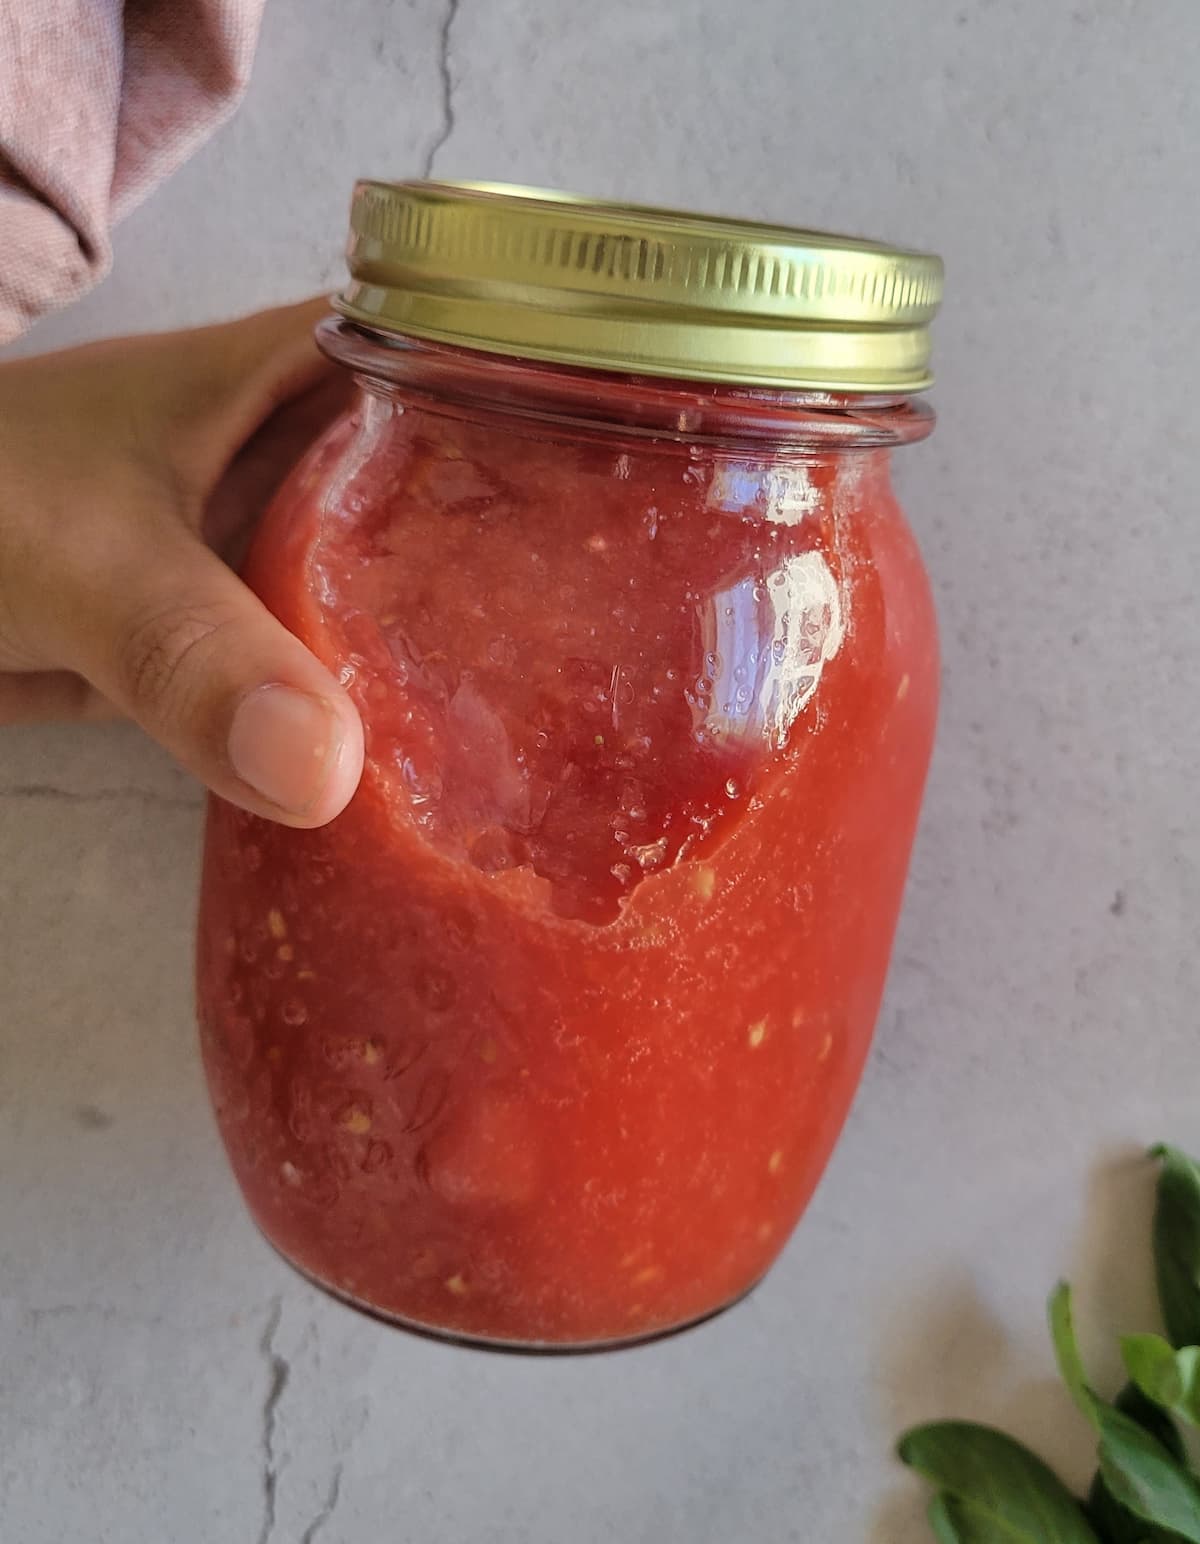 hand holding a jar of tomato sauce